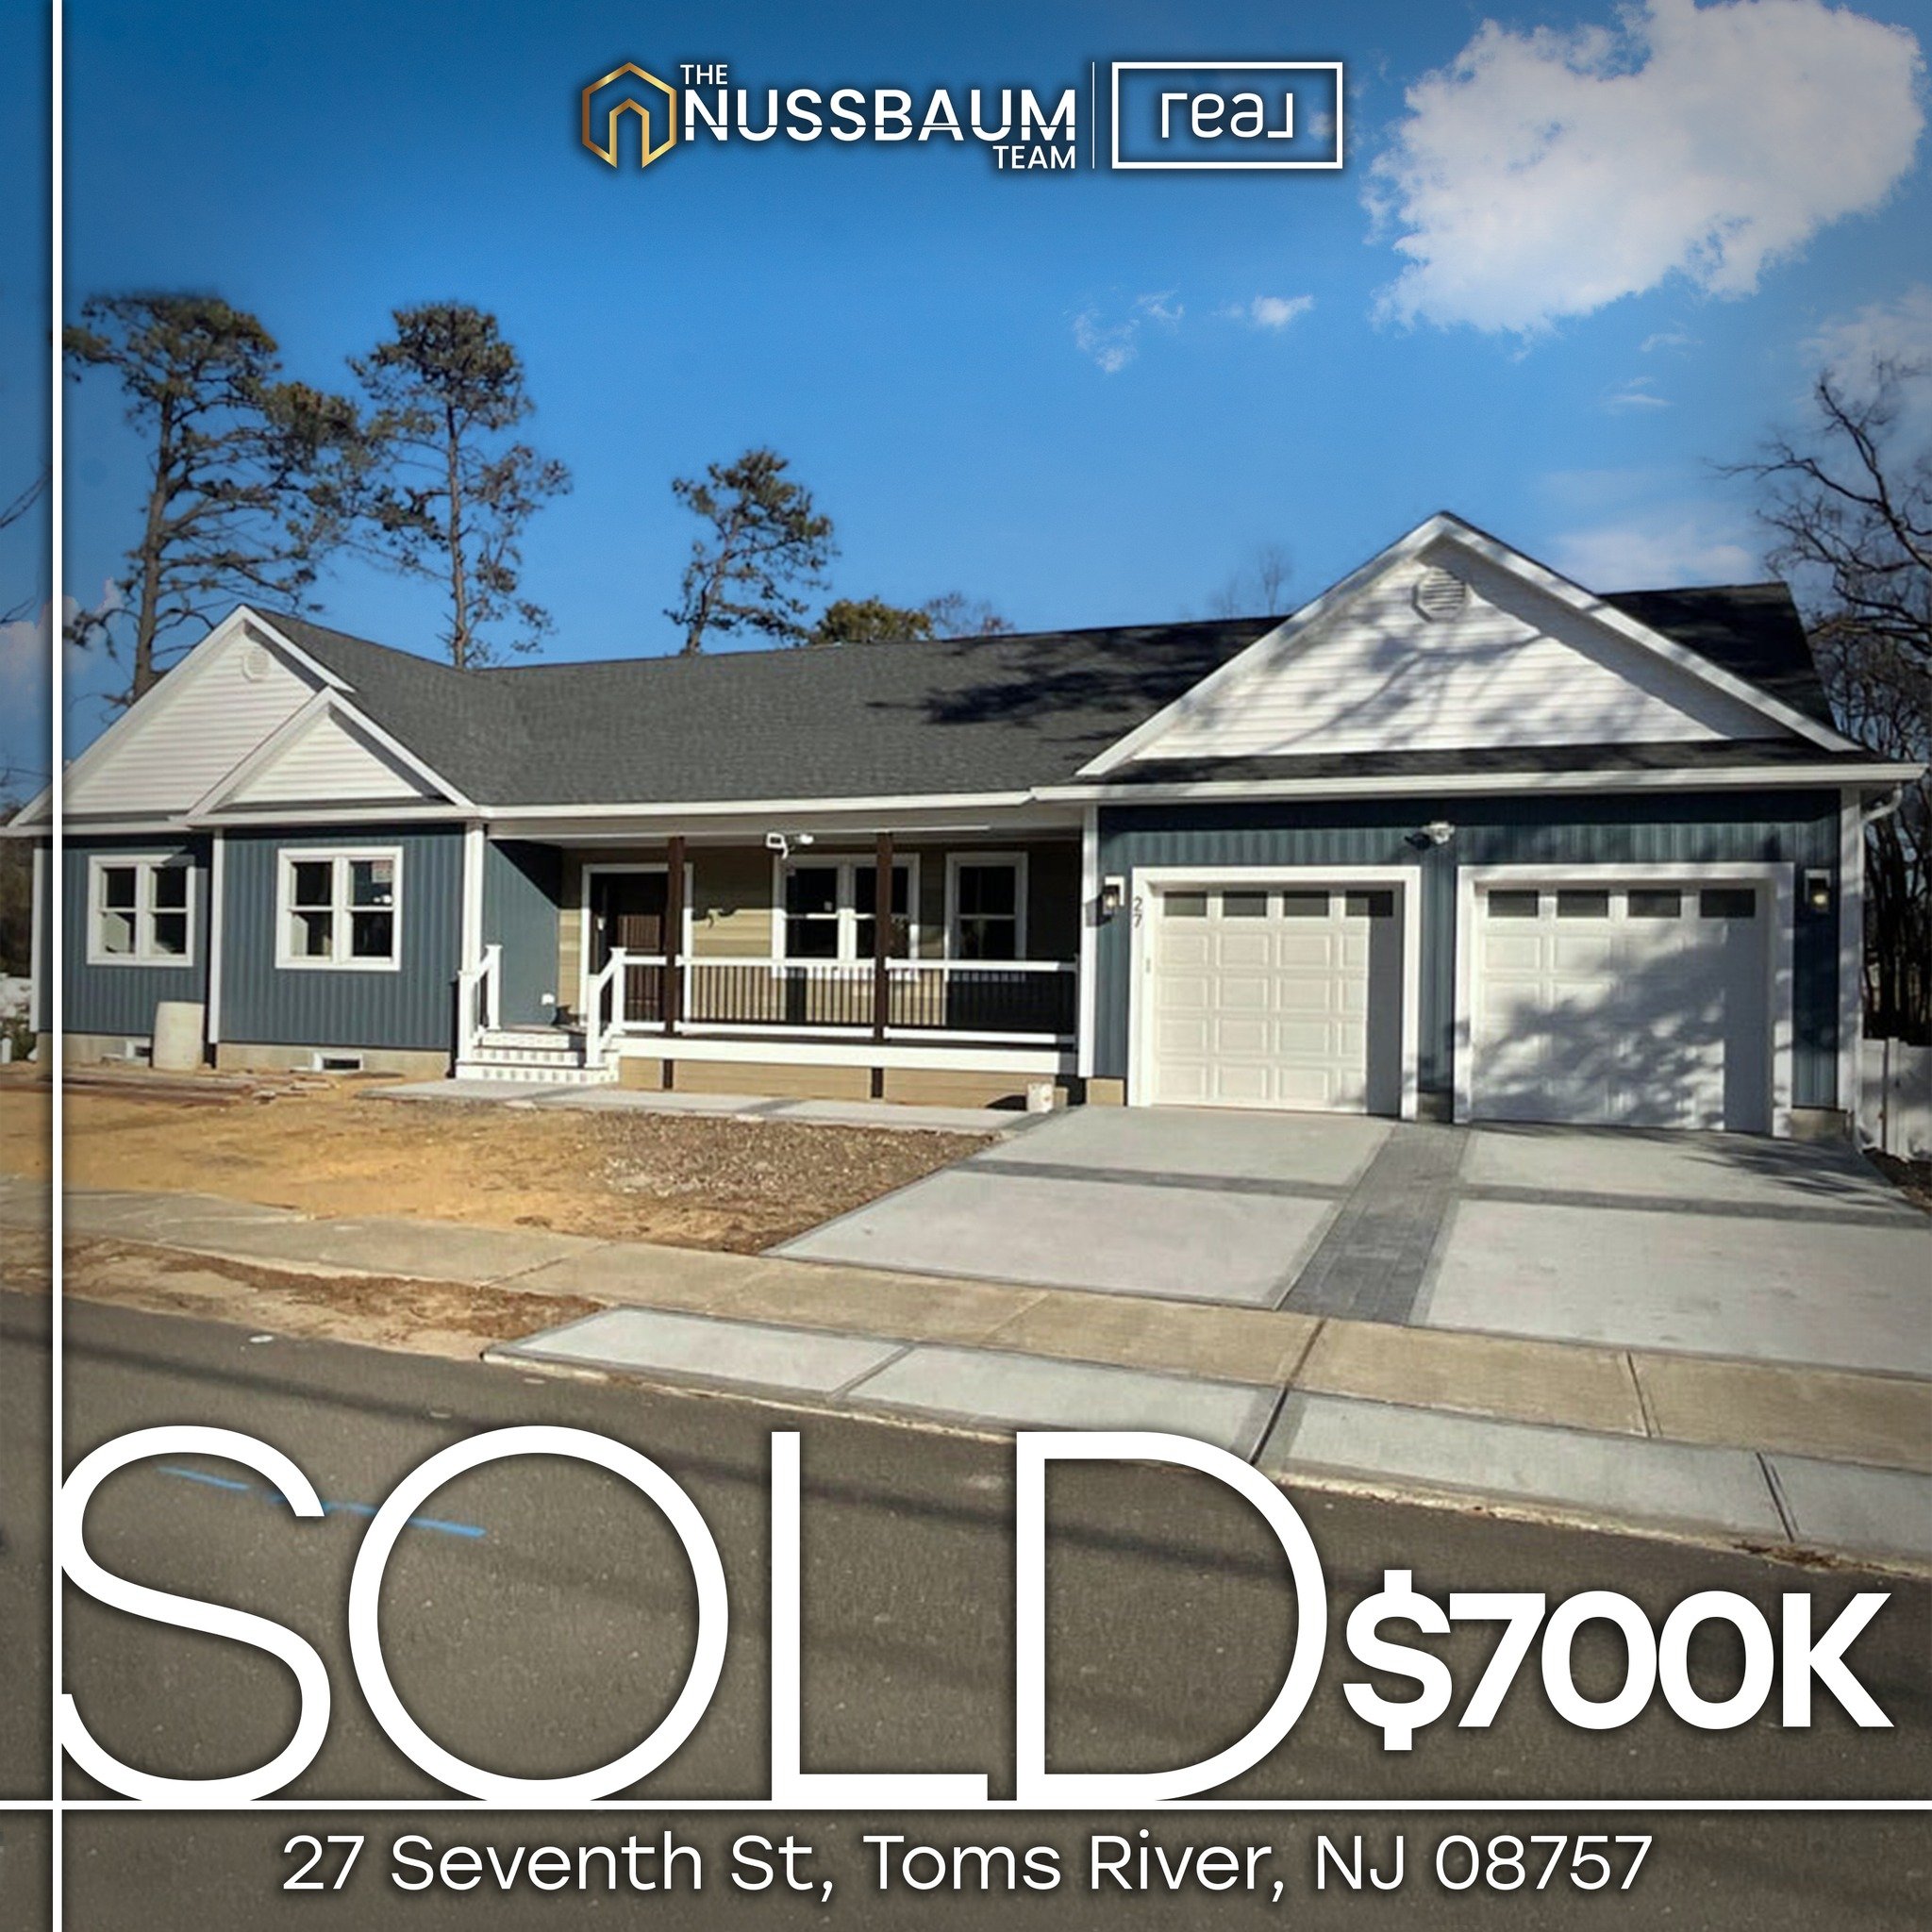 💥JUST SOLD!💥
📍27 Seventh St, Toms River, NJ 08757
3 Bed | 2.5 Bath | 2,646Ft.&sup2;

This new home in Toms River, with an open concept is officially Sold. With so much to offer, including a basement, beautiful kitchen, large deck area, and a prime